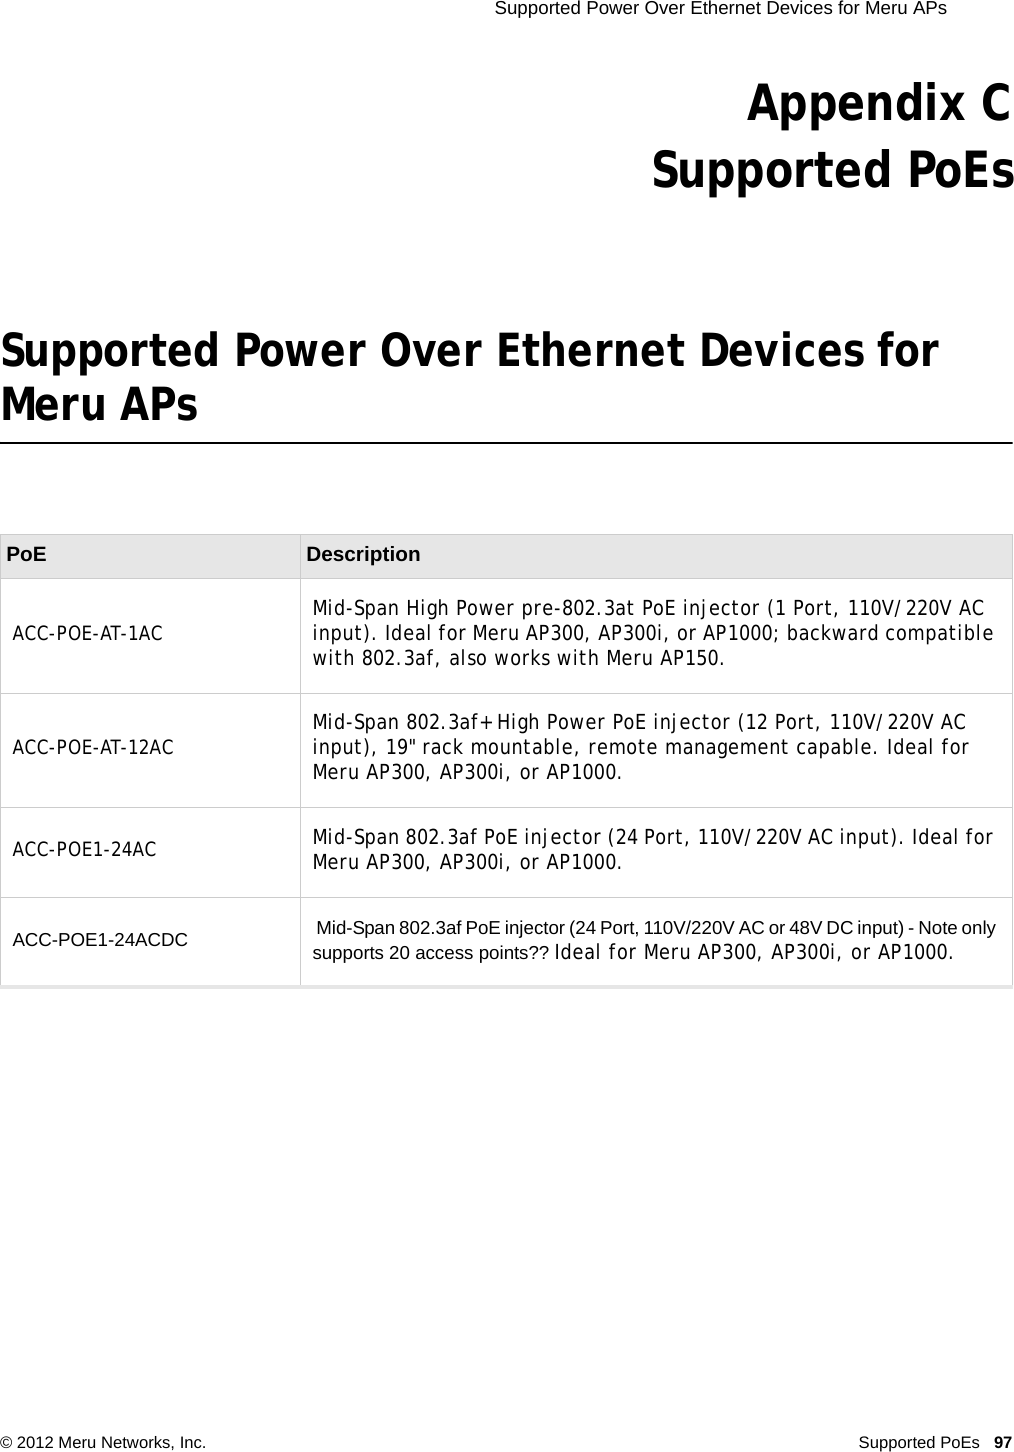  Supported Power Over Ethernet Devices for Meru APs © 2012 Meru Networks, Inc. Supported PoEs 97Appendix CSupported PoEsSupported Power Over Ethernet Devices for Meru APsPoE DescriptionACC-POE-AT-1AC Mid-Span High Power pre-802.3at PoE injector (1 Port, 110V/220V AC input). Ideal for Meru AP300, AP300i, or AP1000; backward compatible with 802.3af, also works with Meru AP150.ACC-POE-AT-12AC  Mid-Span 802.3af+ High Power PoE injector (12 Port, 110V/220V AC input), 19&quot; rack mountable, remote management capable. Ideal for Meru AP300, AP300i, or AP1000. ACC-POE1-24AC Mid-Span 802.3af PoE injector (24 Port, 110V/220V AC input). Ideal for Meru AP300, AP300i, or AP1000. ACC-POE1-24ACDC  Mid-Span 802.3af PoE injector (24 Port, 110V/220V AC or 48V DC input) - Note only supports 20 access points?? Ideal for Meru AP300, AP300i, or AP1000. 